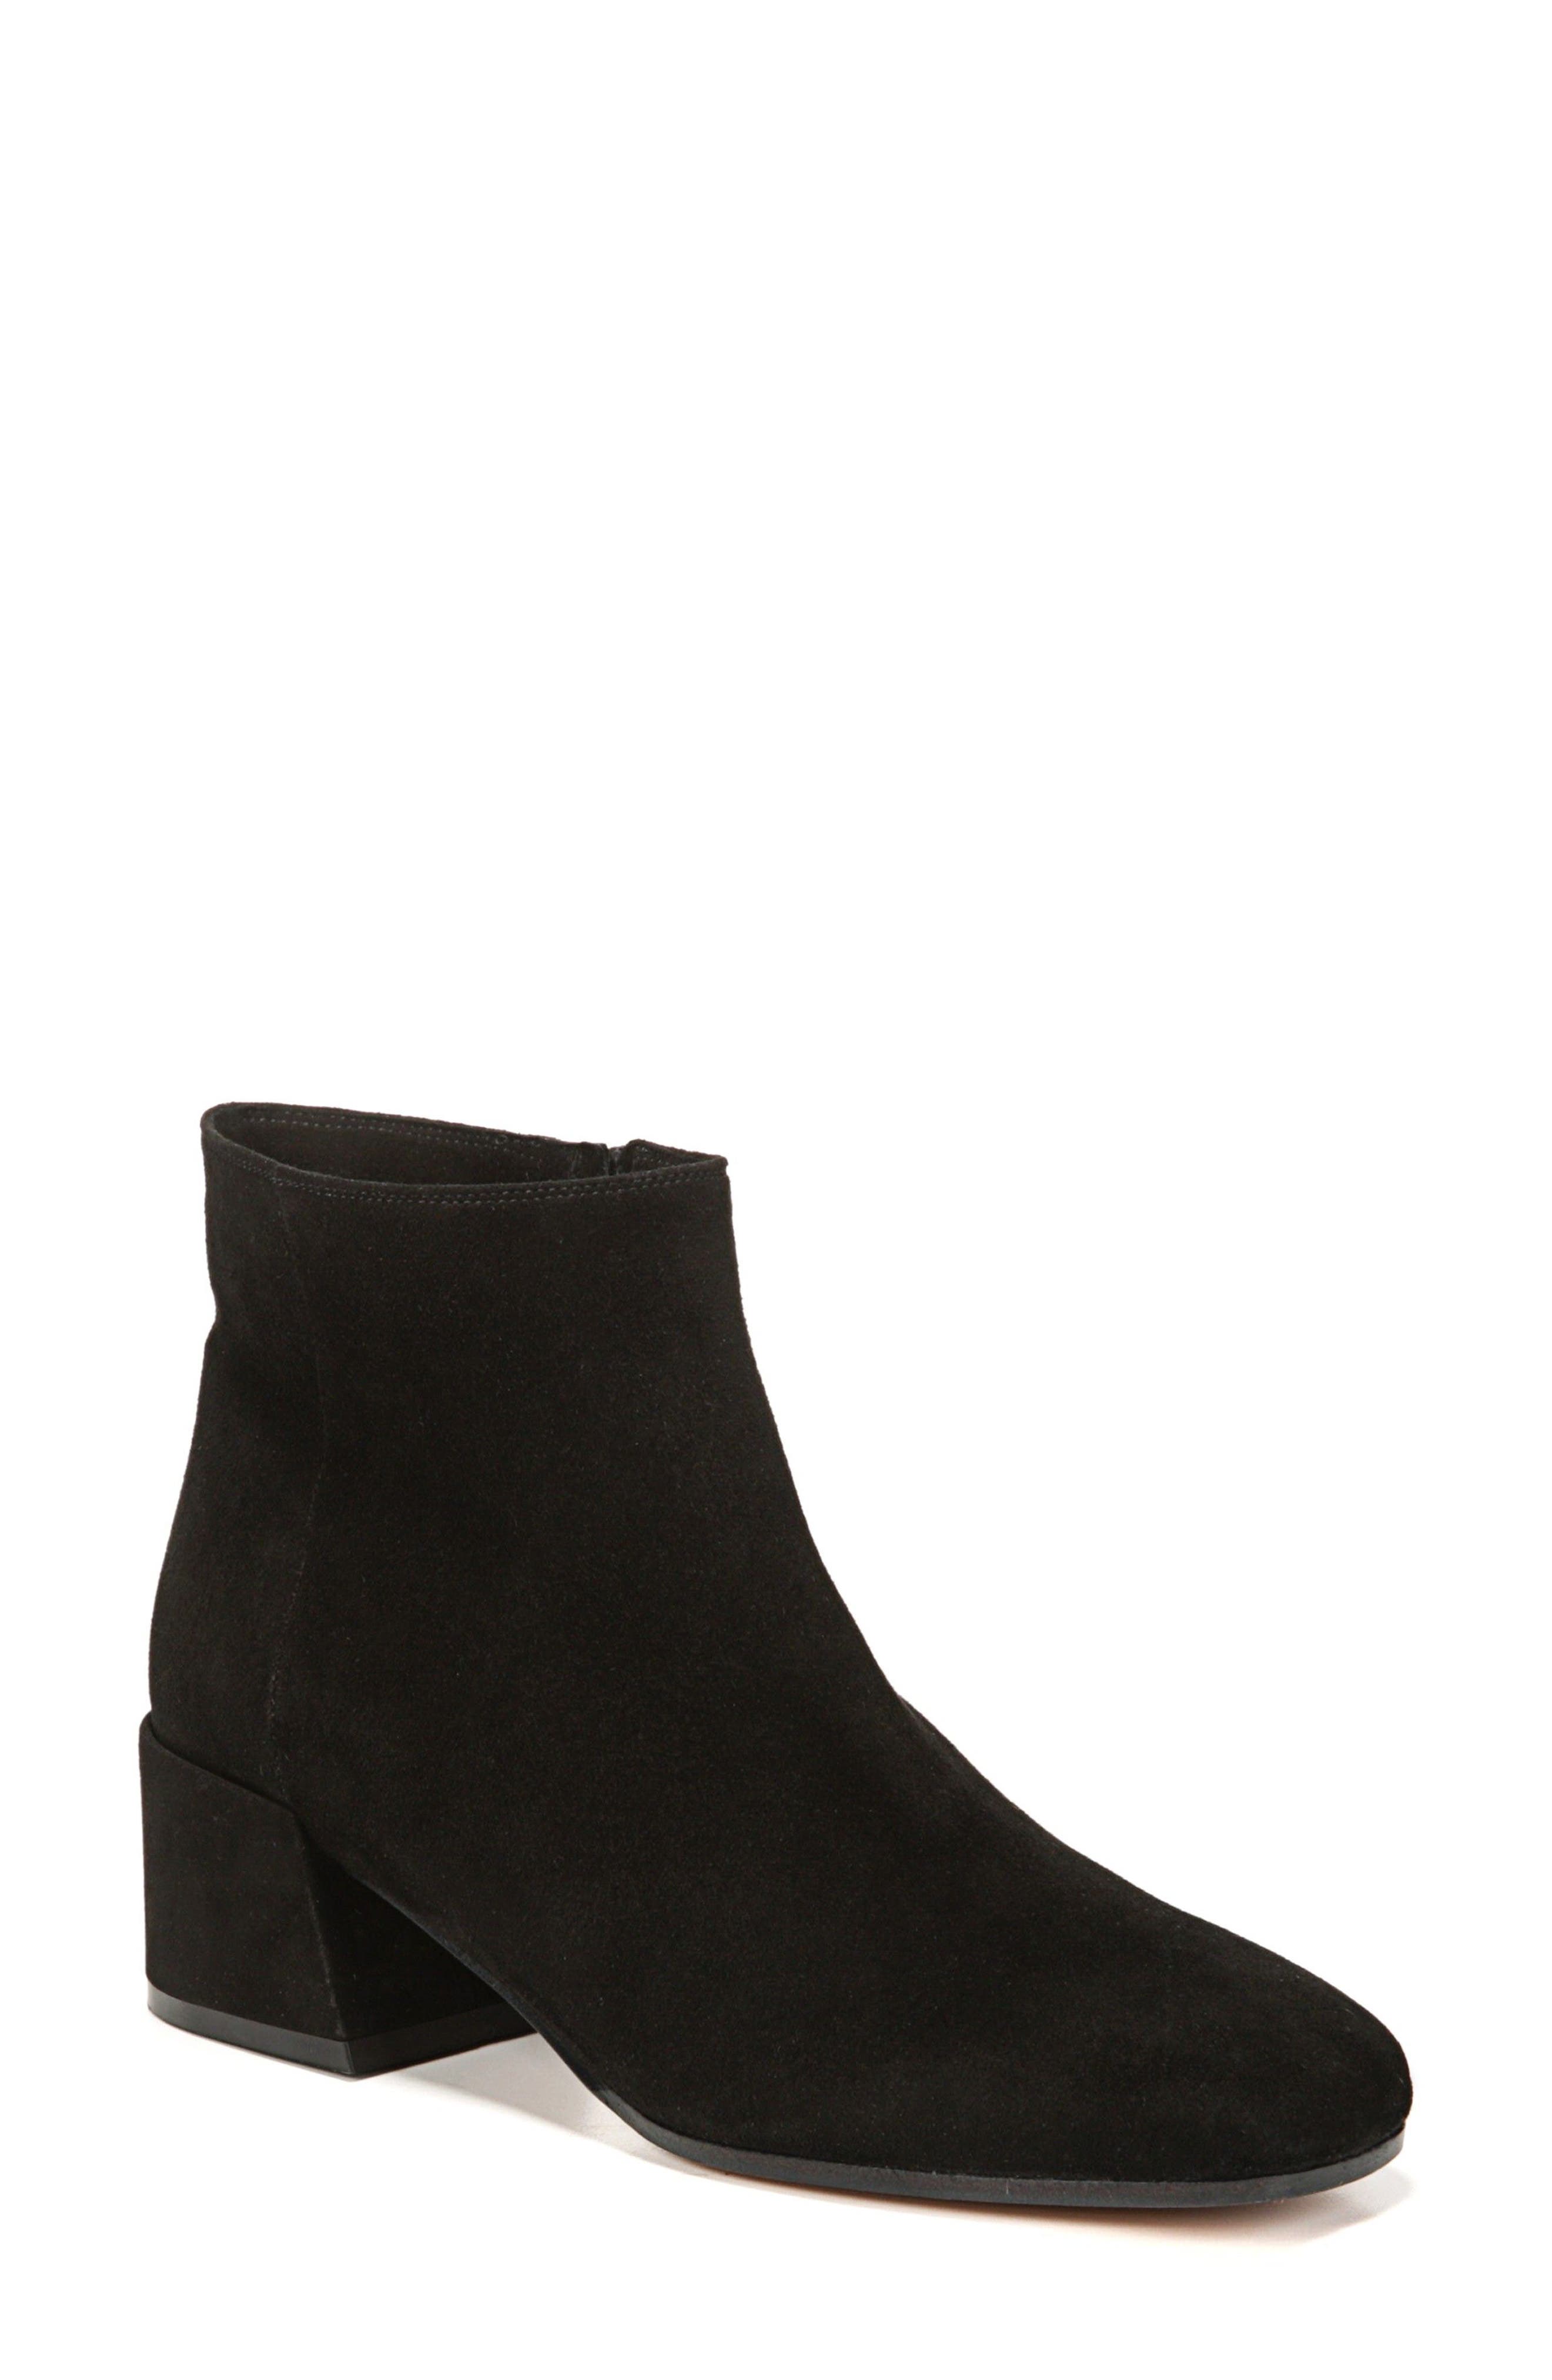 vince ostend boots